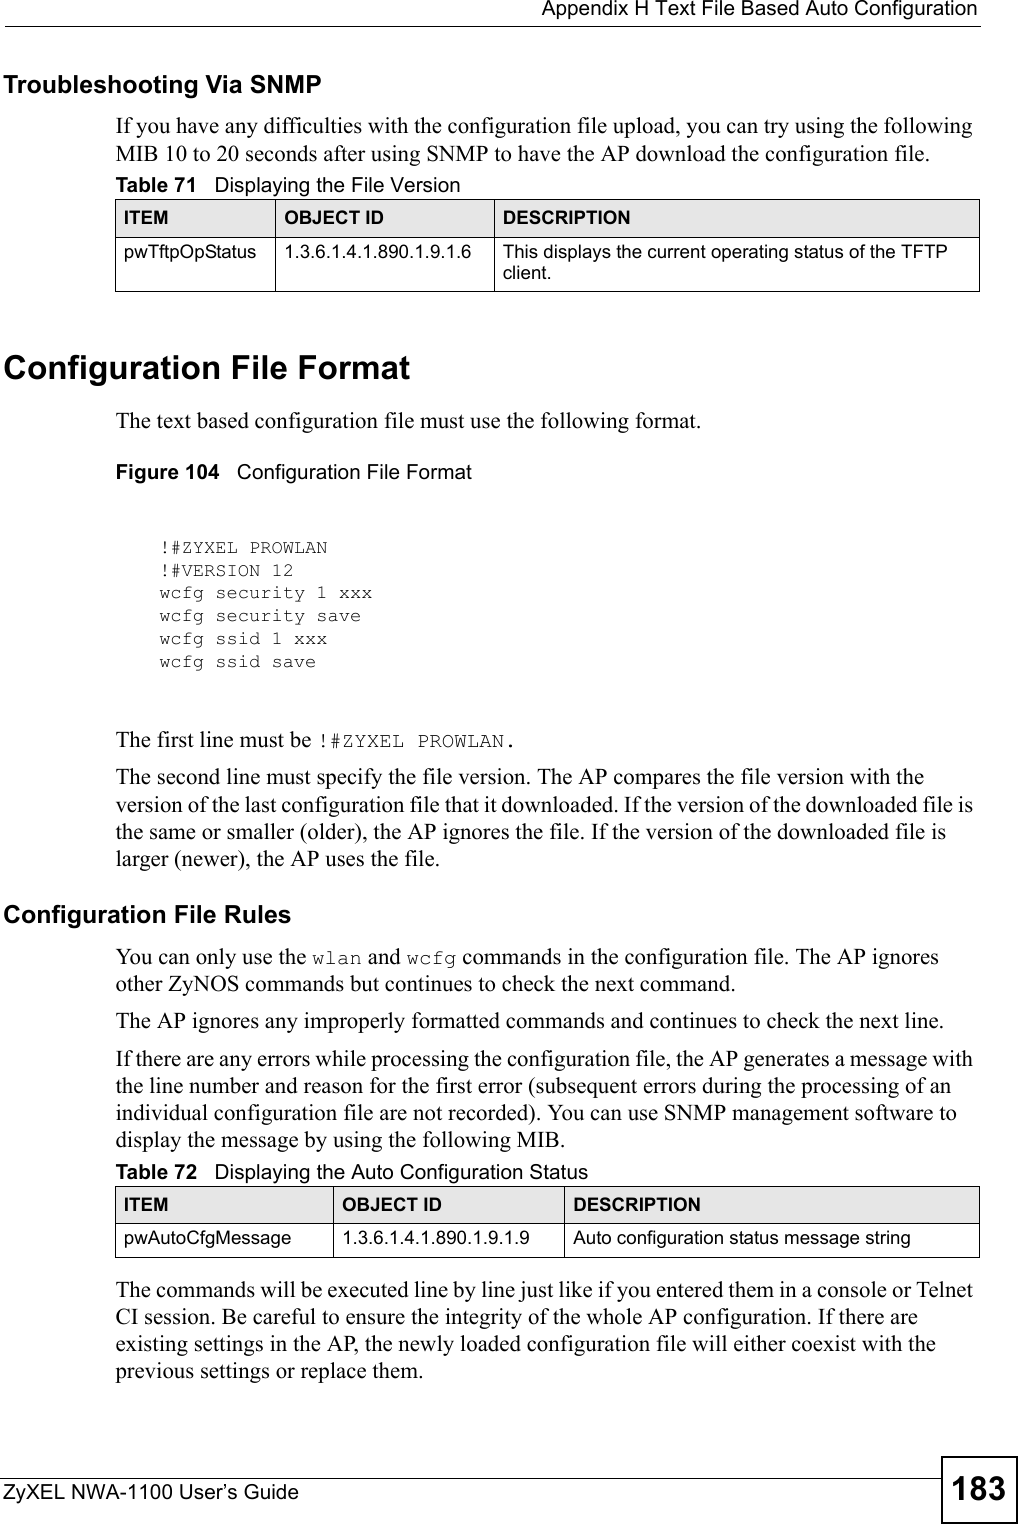  Appendix H Text File Based Auto ConfigurationZyXEL NWA-1100 User’s Guide 183Troubleshooting Via SNMPIf you have any difficulties with the configuration file upload, you can try using the following MIB 10 to 20 seconds after using SNMP to have the AP download the configuration file.Configuration File FormatThe text based configuration file must use the following format.Figure 104   Configuration File FormatThe first line must be !#ZYXEL PROWLAN. The second line must specify the file version. The AP compares the file version with the version of the last configuration file that it downloaded. If the version of the downloaded file is the same or smaller (older), the AP ignores the file. If the version of the downloaded file is larger (newer), the AP uses the file.Configuration File RulesYou can only use the wlan and wcfg commands in the configuration file. The AP ignores other ZyNOS commands but continues to check the next command.The AP ignores any improperly formatted commands and continues to check the next line.If there are any errors while processing the configuration file, the AP generates a message with the line number and reason for the first error (subsequent errors during the processing of an individual configuration file are not recorded). You can use SNMP management software to display the message by using the following MIB.The commands will be executed line by line just like if you entered them in a console or Telnet CI session. Be careful to ensure the integrity of the whole AP configuration. If there are existing settings in the AP, the newly loaded configuration file will either coexist with the previous settings or replace them.Table 71   Displaying the File VersionITEM OBJECT ID DESCRIPTIONpwTftpOpStatus 1.3.6.1.4.1.890.1.9.1.6 This displays the current operating status of the TFTP client.!#ZYXEL PROWLAN!#VERSION 12wcfg security 1 xxxwcfg security savewcfg ssid 1 xxxwcfg ssid saveTable 72   Displaying the Auto Configuration StatusITEM OBJECT ID DESCRIPTIONpwAutoCfgMessage 1.3.6.1.4.1.890.1.9.1.9 Auto configuration status message string